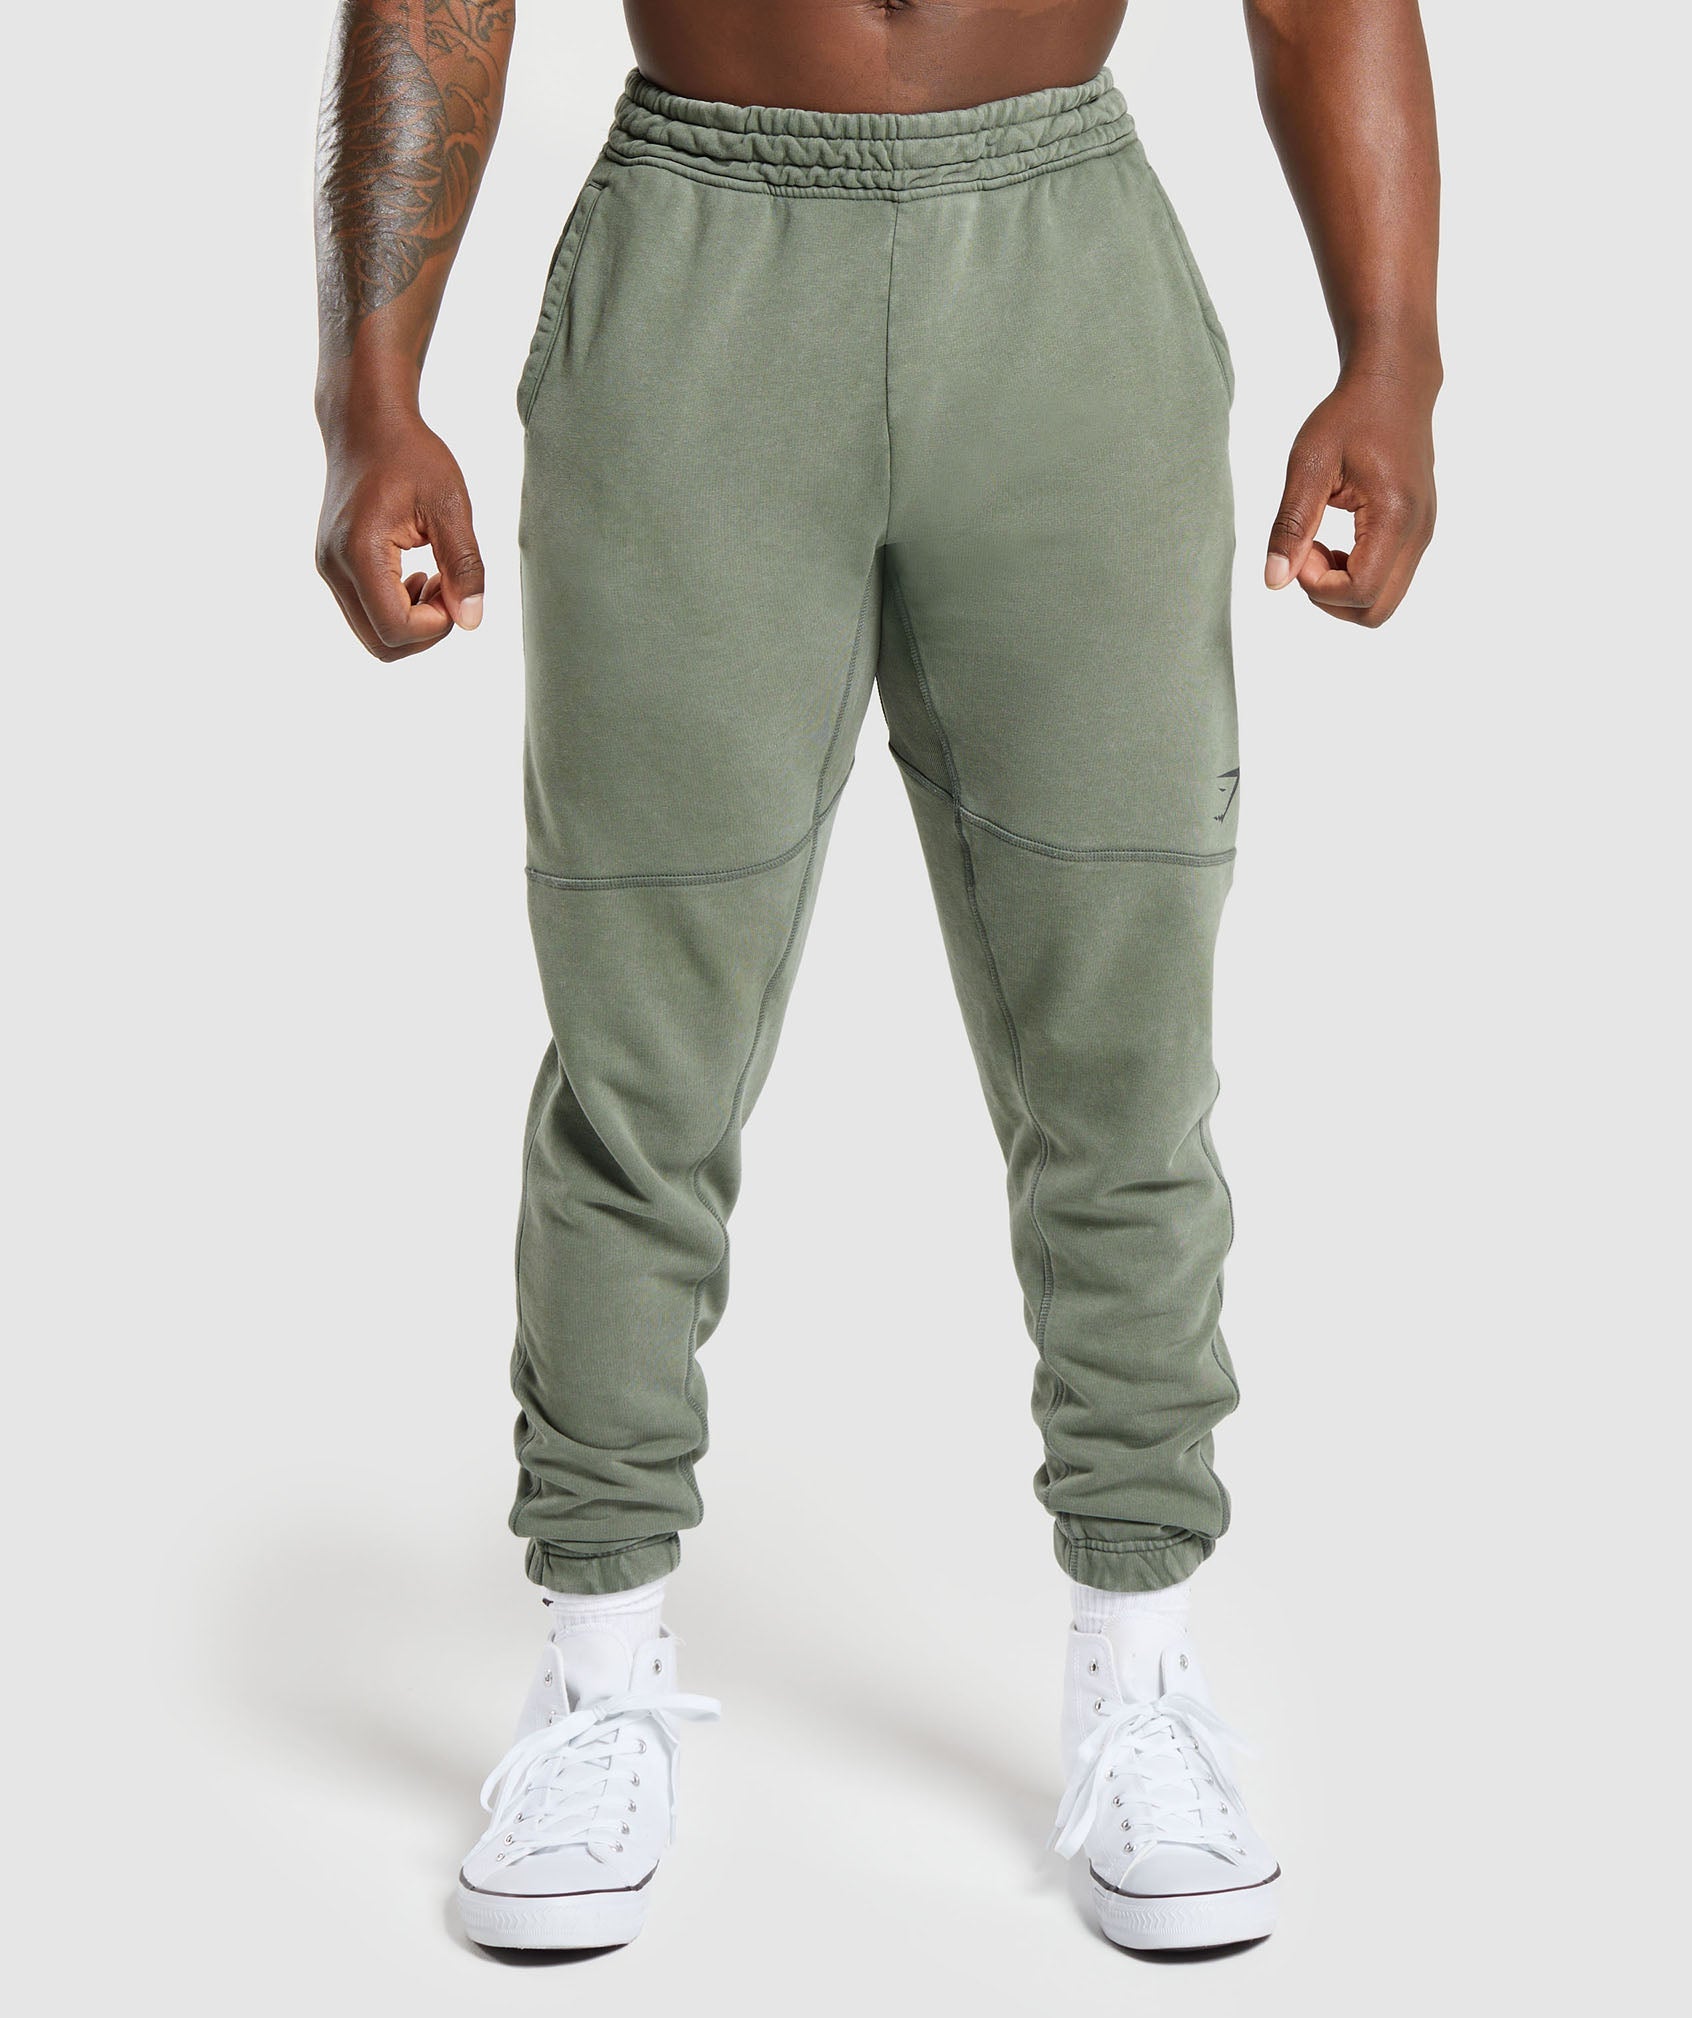 Heritage Joggers in Dusk Green - view 1